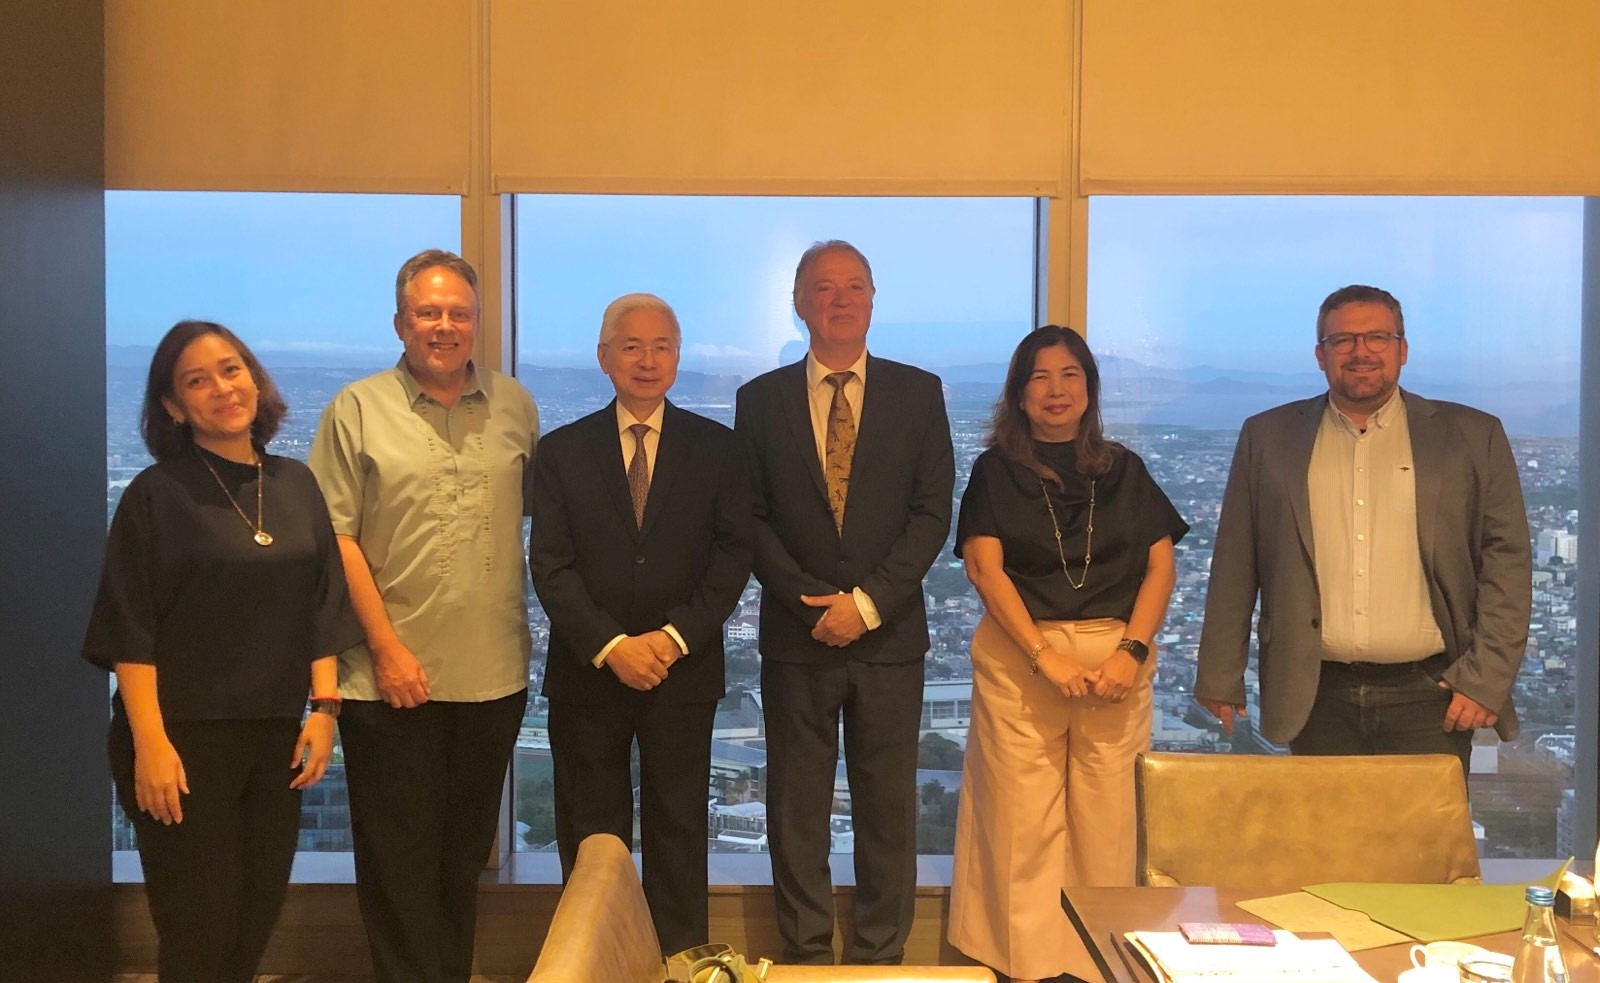 Ambassador Michel Parys of the Embassy of the Kingdom of Belgium in Manila joined the meeting, along with other attendees including BOI Senior Investments Specialist Diorella Joy C. Bobis; Turbulent Hydro’s CEO Dr. Walter Buydens PhD Eng., Trade and Investment Commissioner Mia Santamaria-Abela, and Turbulent Hydro’s Chief Operating Officer Frederik Ragé.